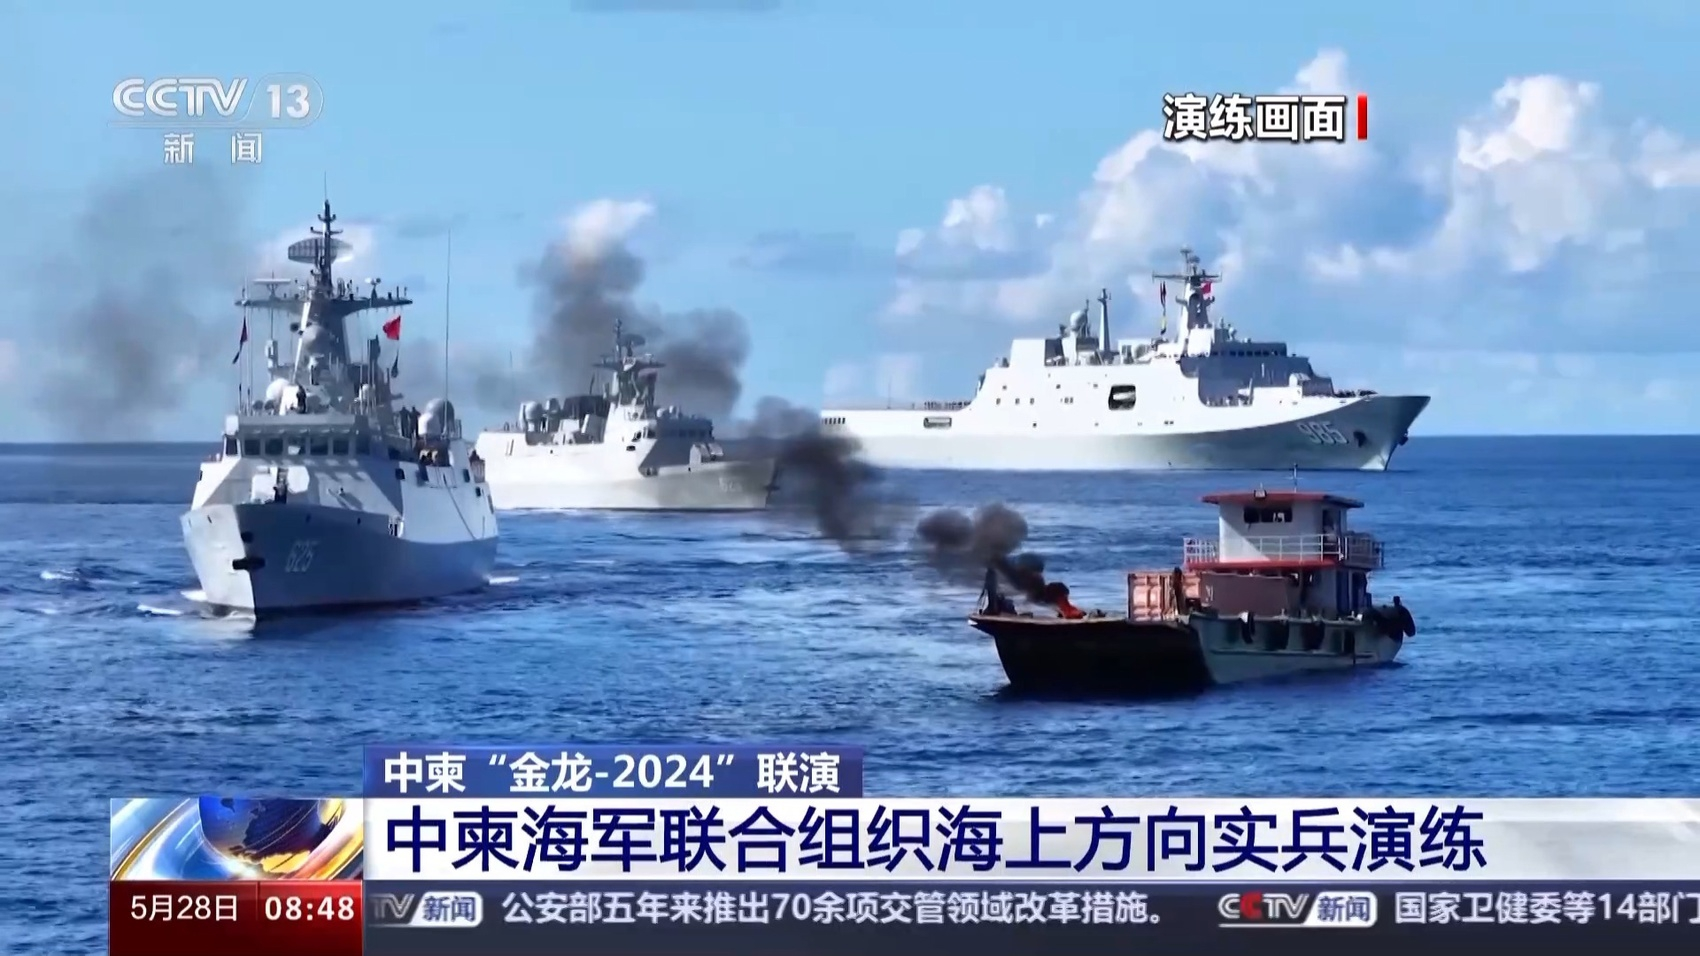 Chinese, Cambodian ships conduct joint exercises. Photo: CCTV